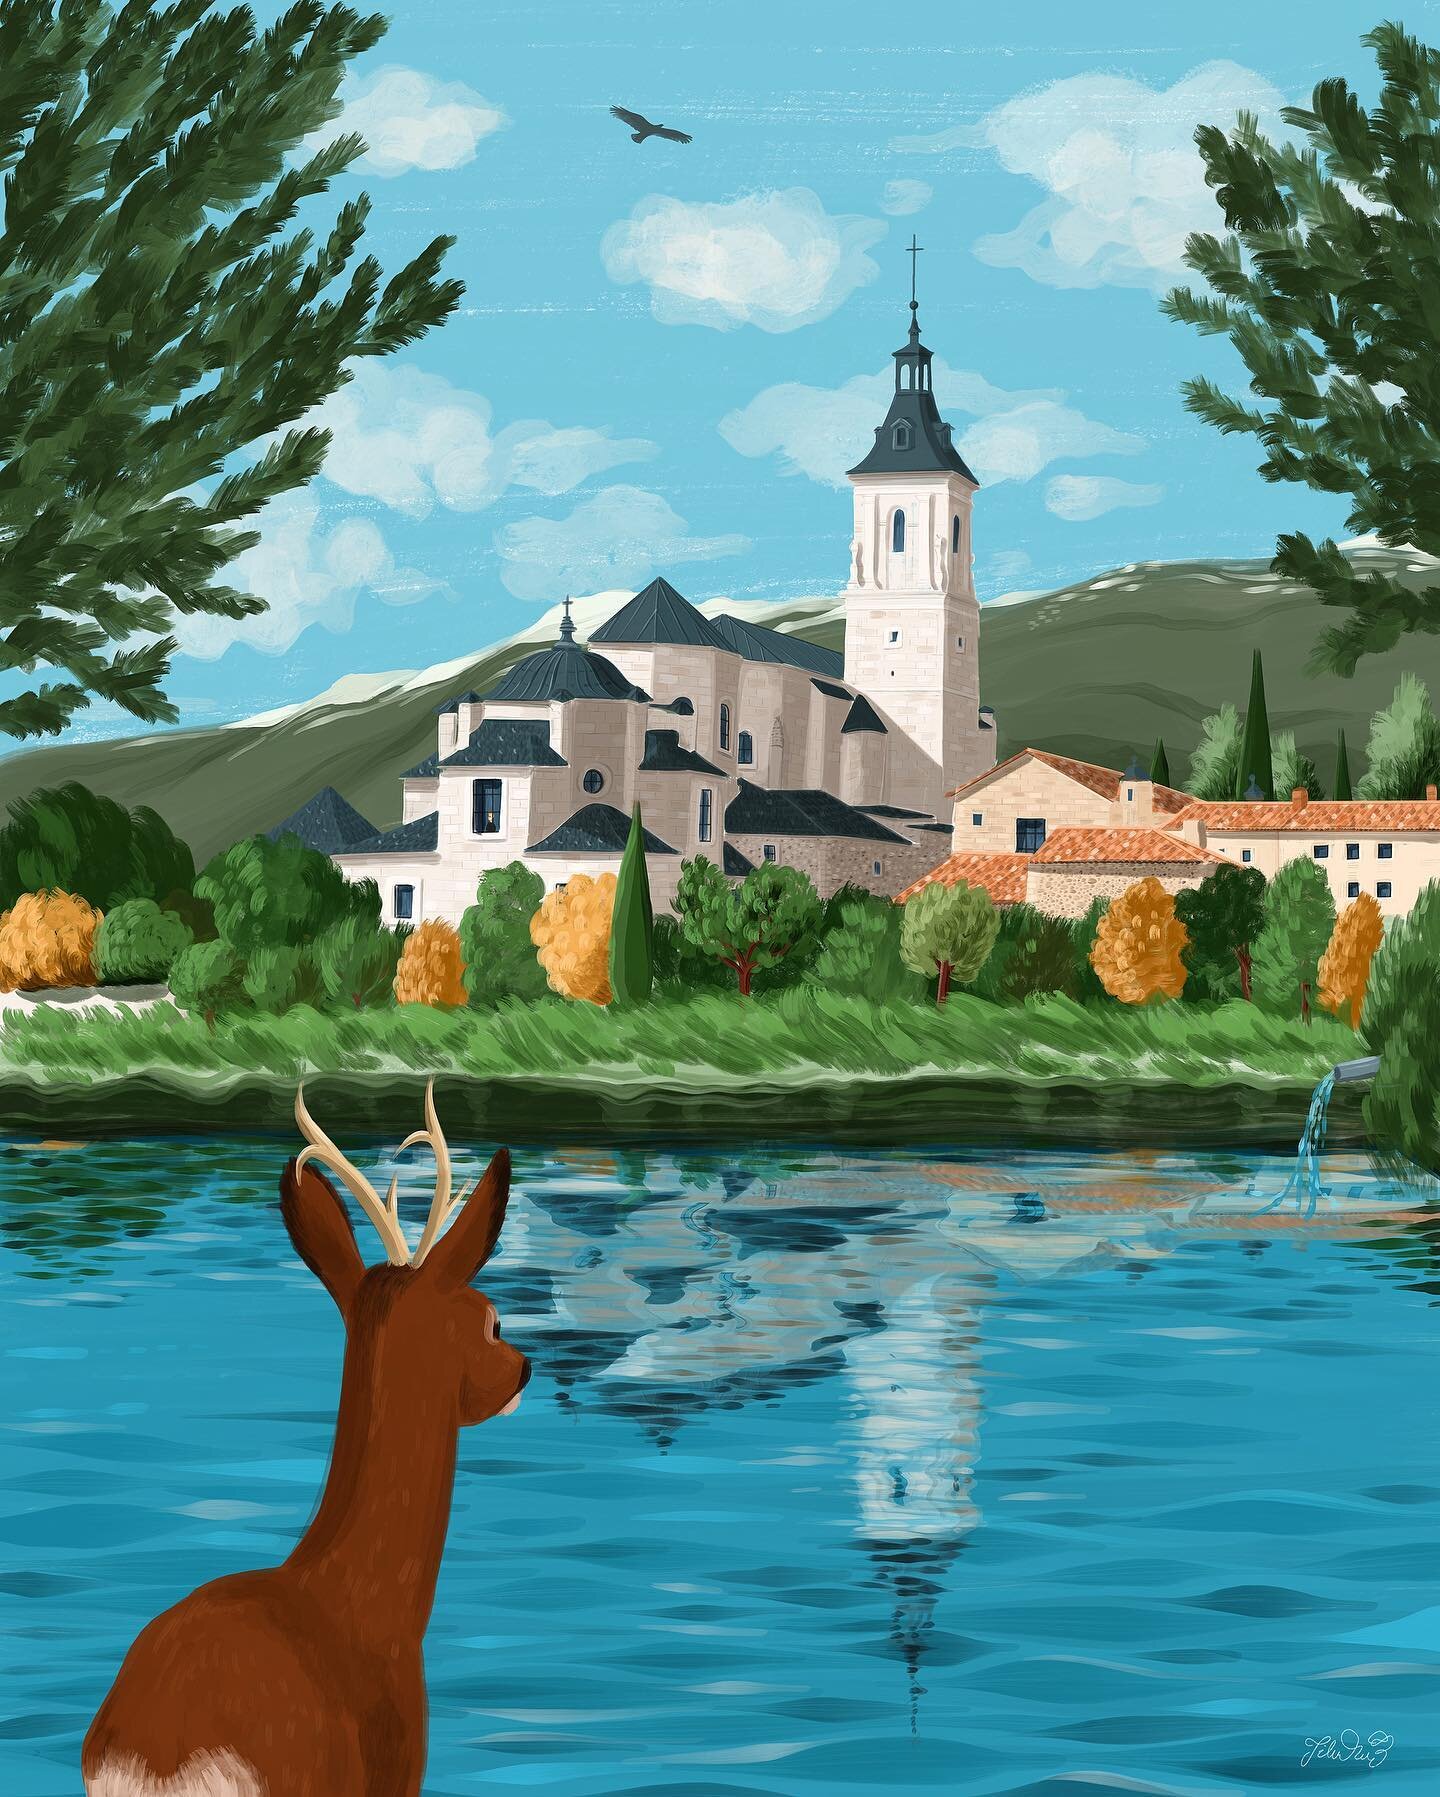 View of Santa Maria del Paular, a monastery from the 14th century surrounded by nature, in Rascafria, one of the small towns from Madrid I have illustrated for @comunidadmadrid.
​
​
​
​#illustration #illustrator #artwork #drawing #art #dailydrawing #